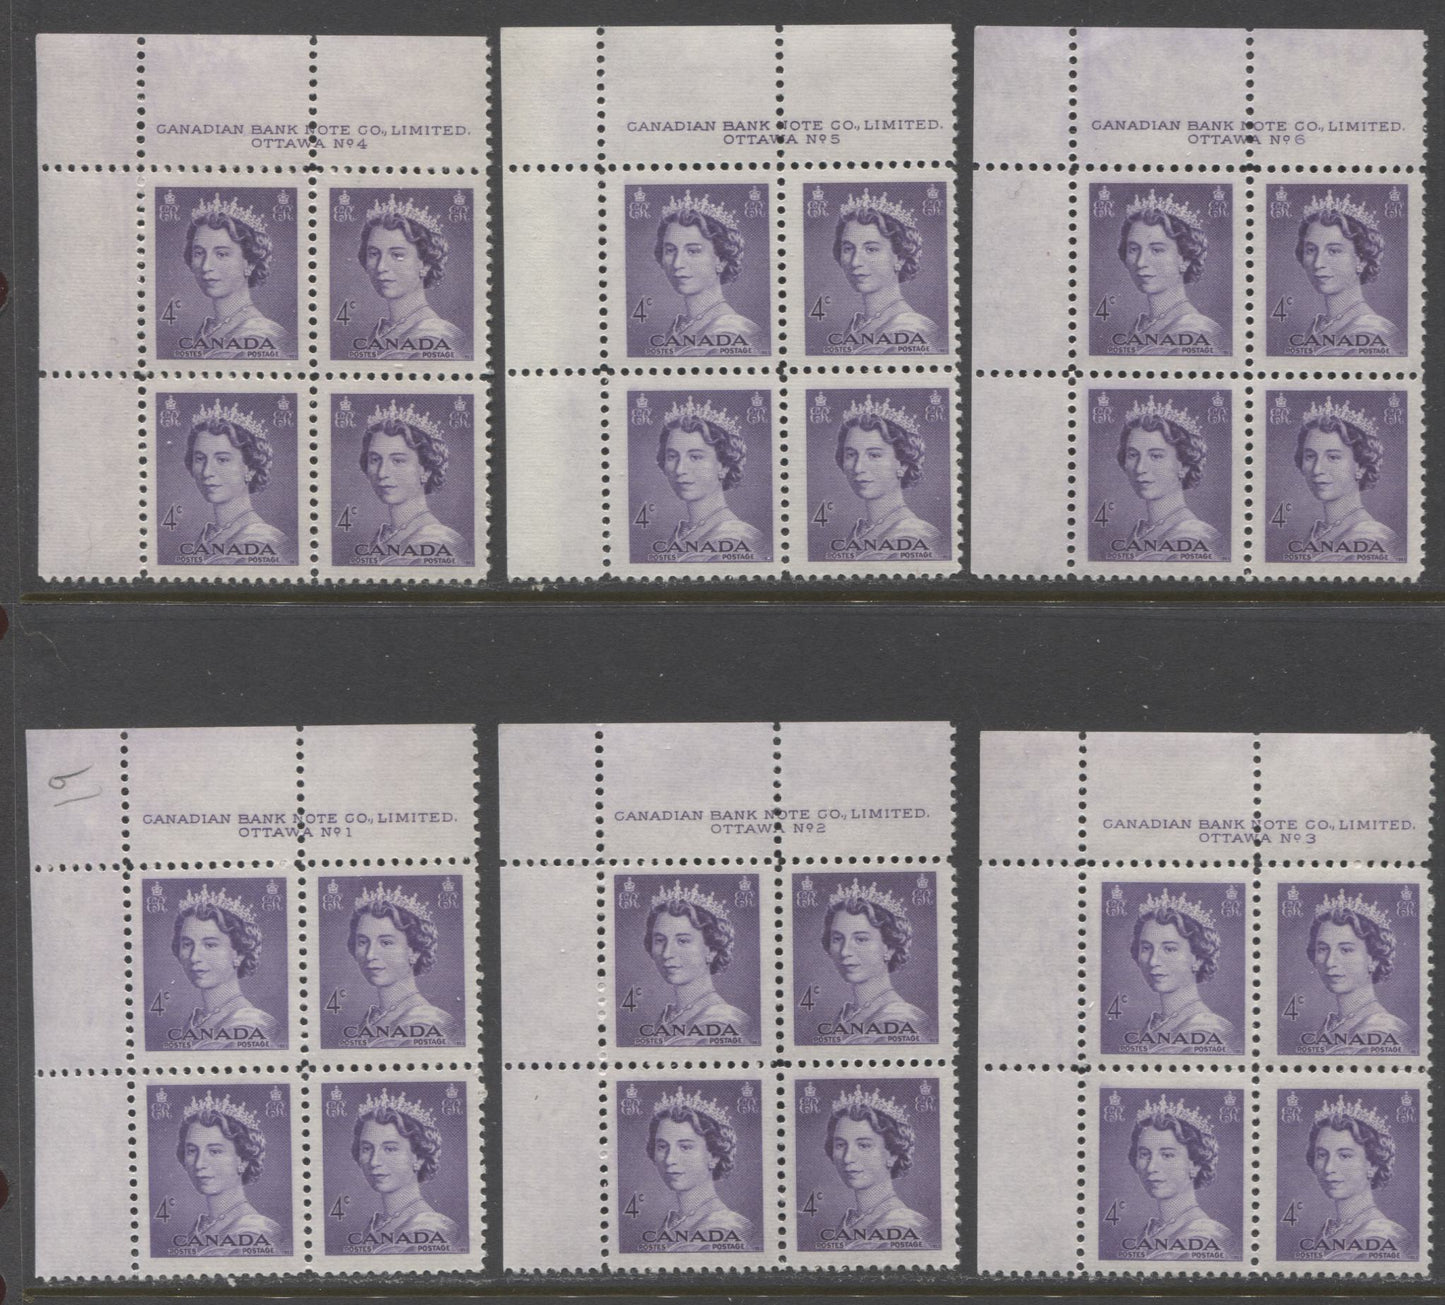 Lot 19 Canada #328 4c Violet Queen Elizabeth II, 1953 Karsh Issue, 6 F/VFNH UL Plates 1-6 Blocks Of 4 On Horizontal Ribbed & Smooth Papers With Various Shades